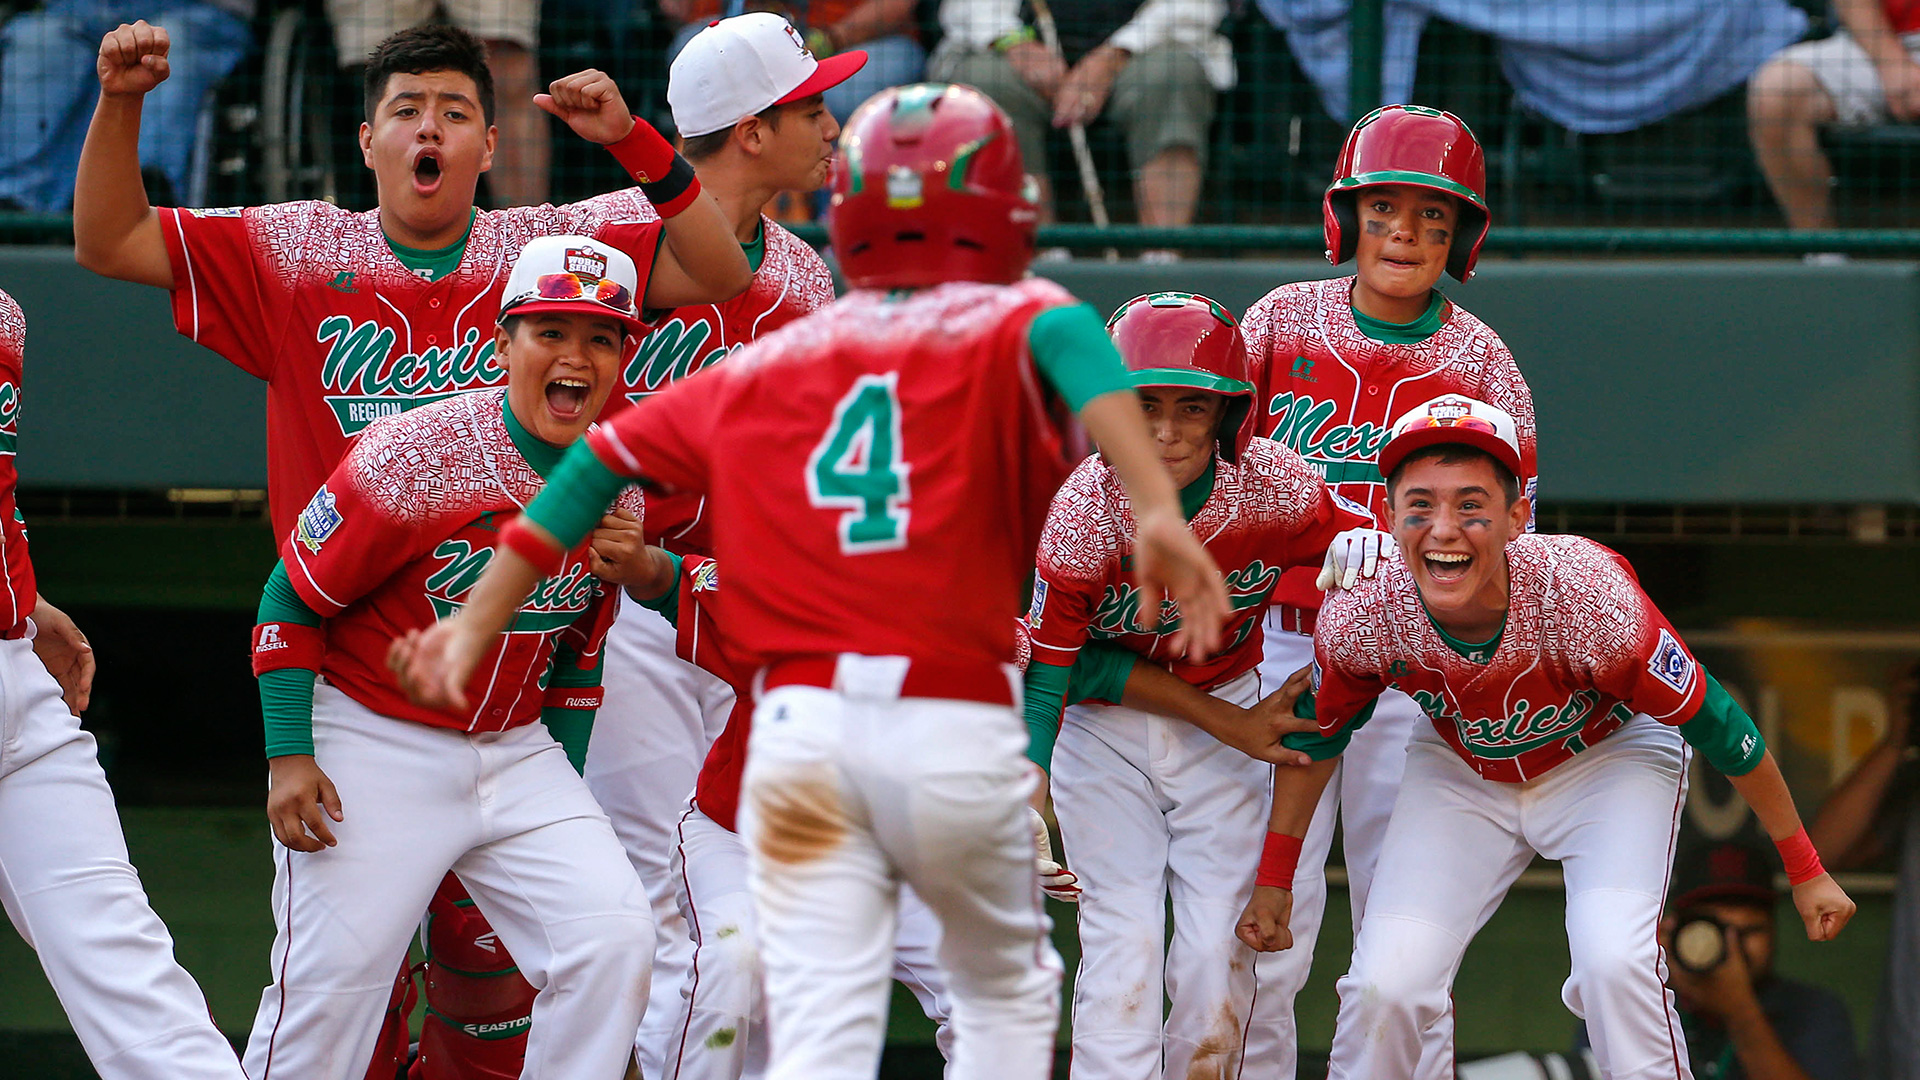 Little League World Series 2015 scores California, Mexico stay alive